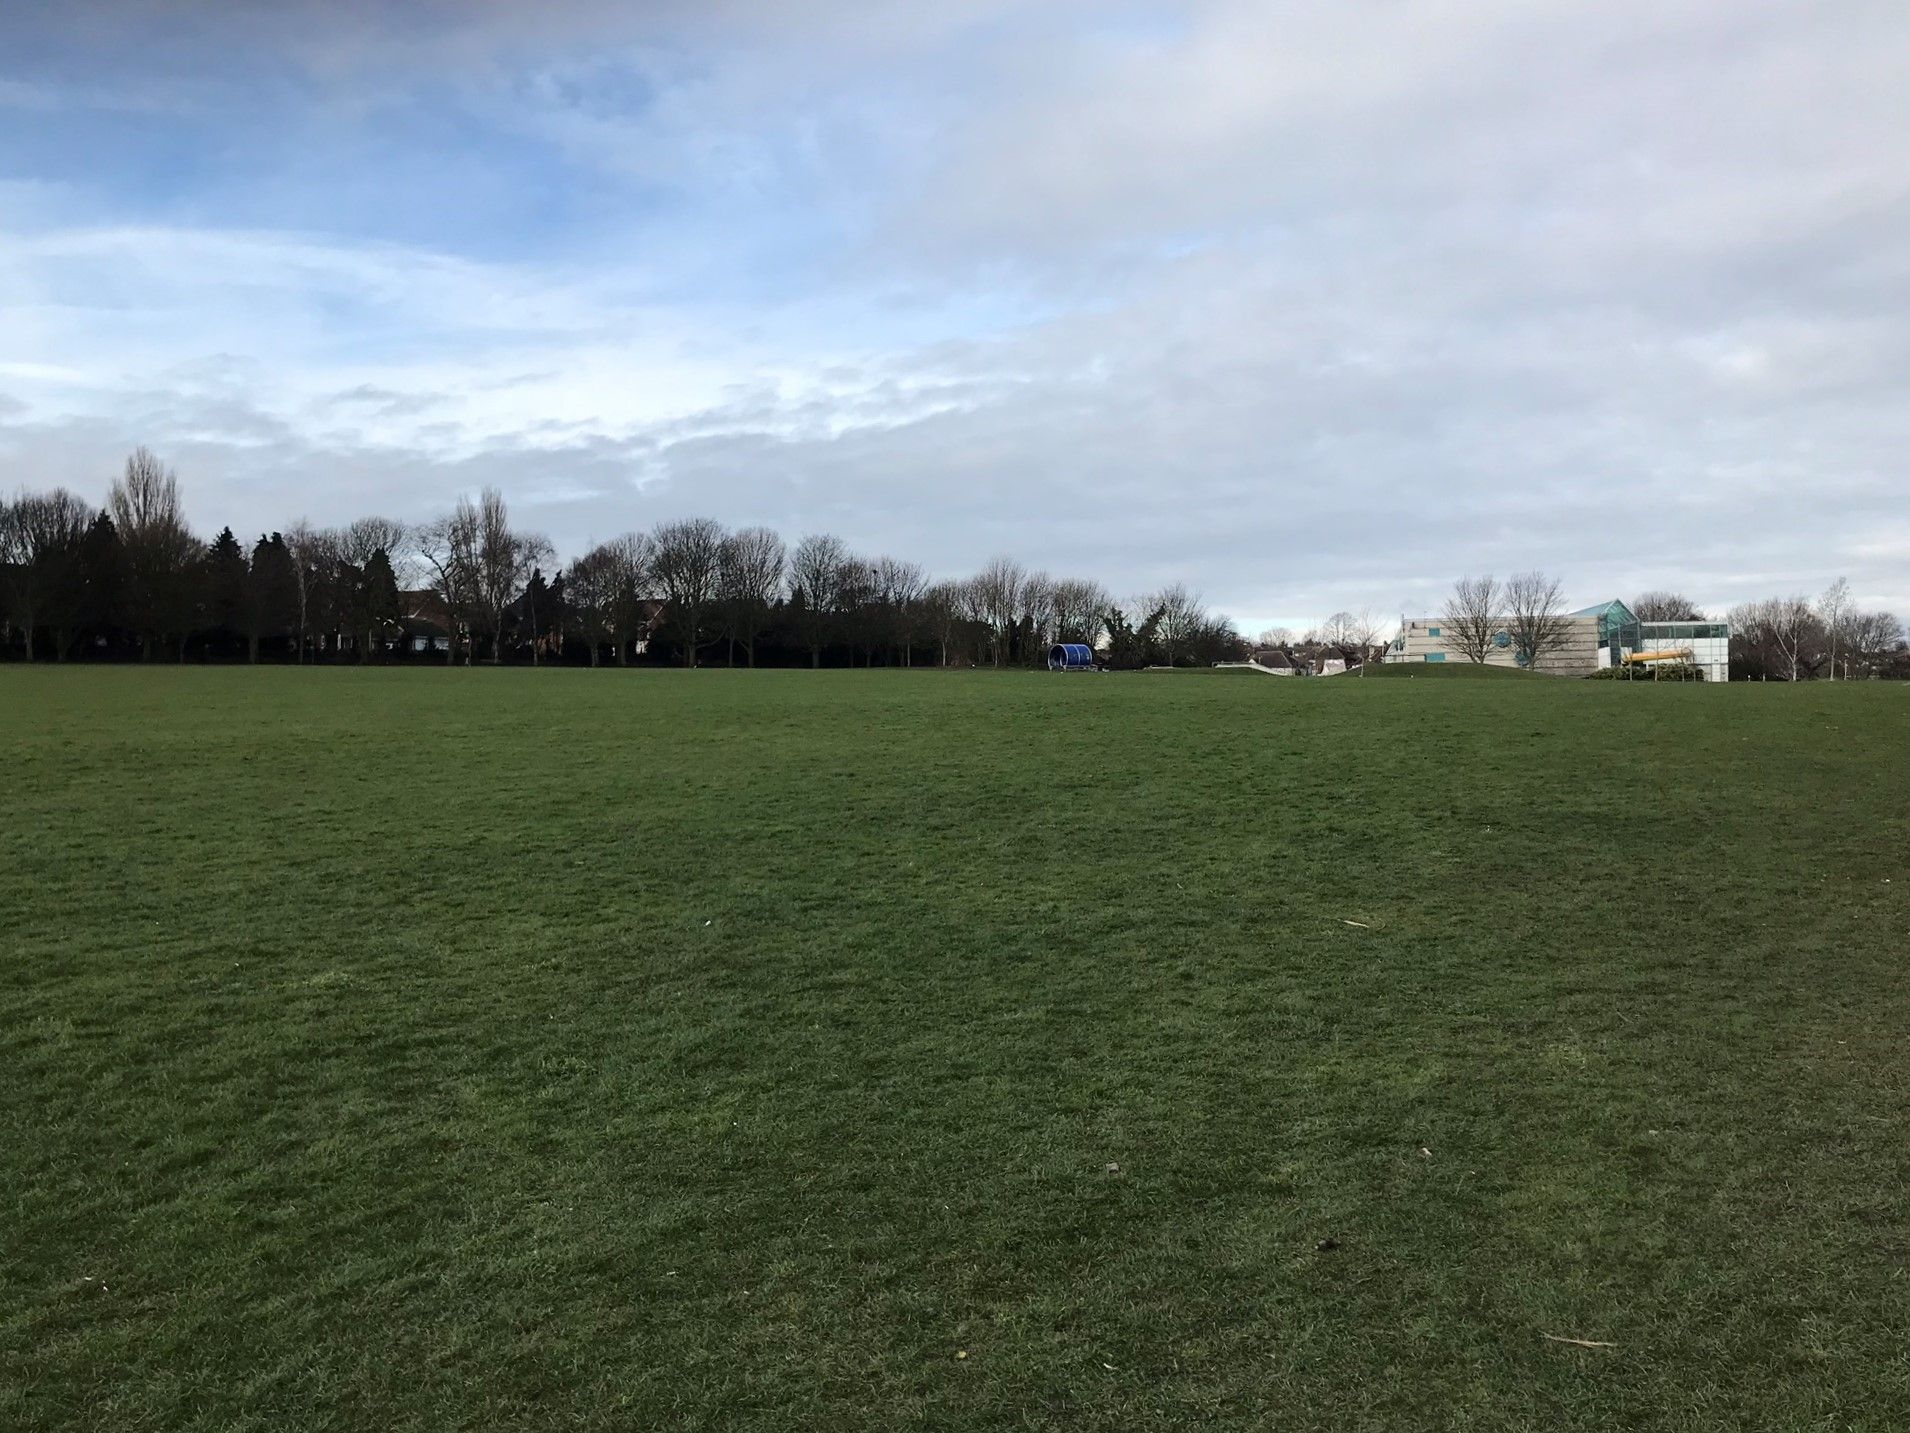 View across the field to the skate park and leisure centre